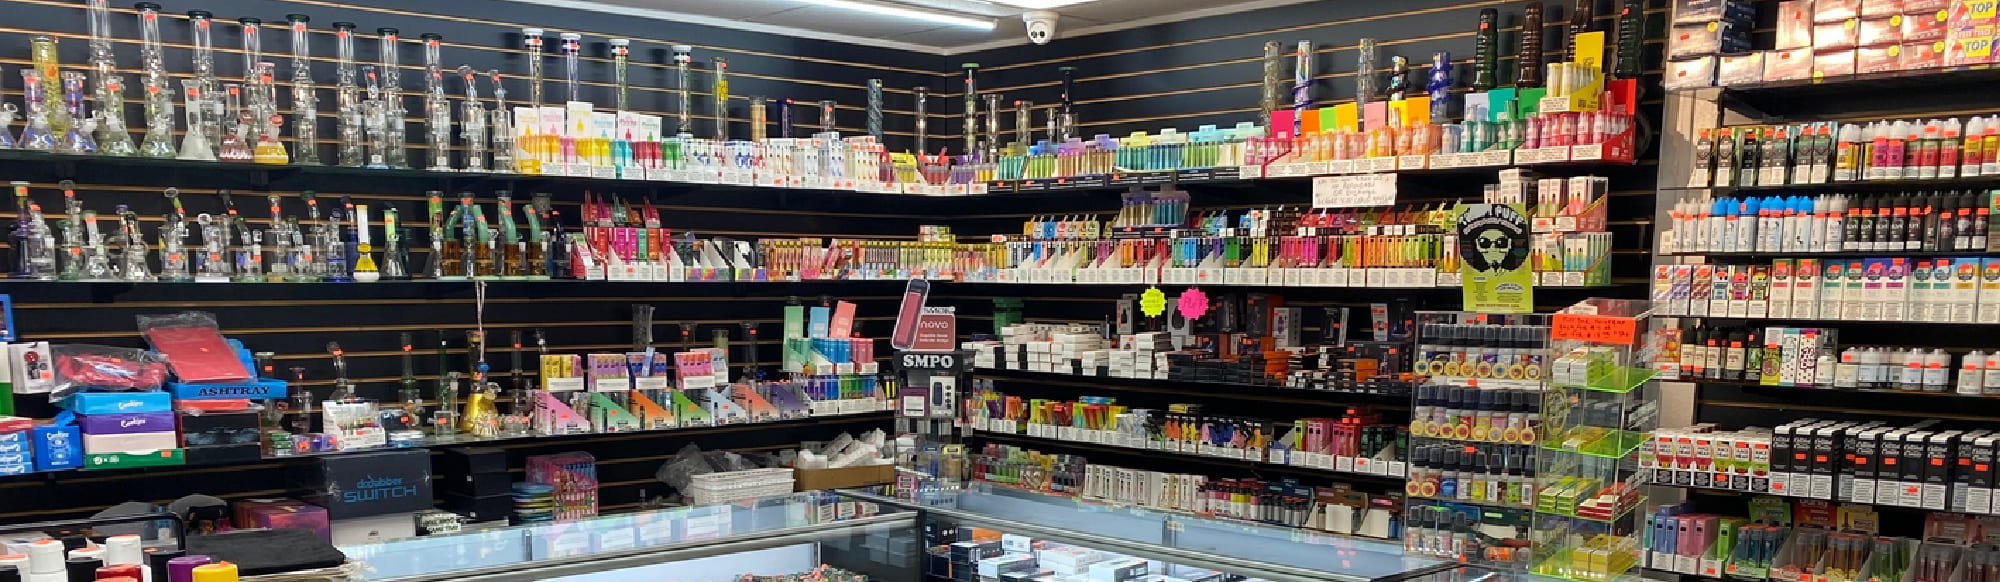 image of 4th ave vapor and smoke shop in albany ga